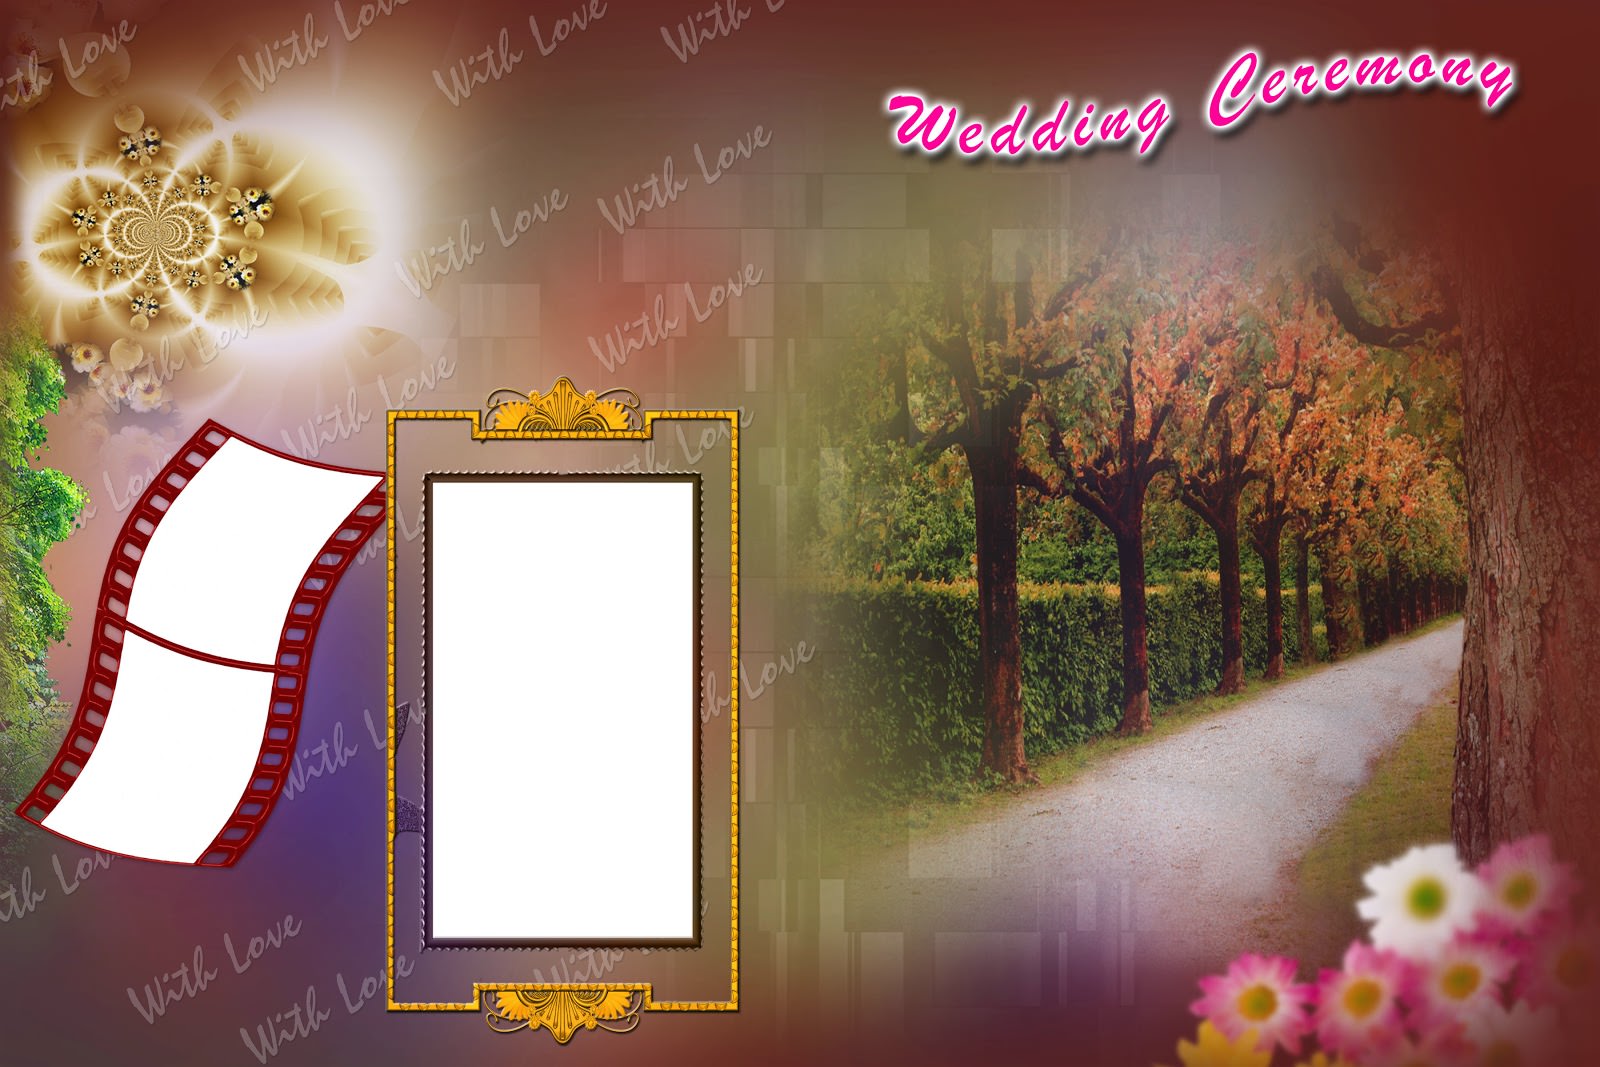 Psd Wedding Backgrounds For Photoshop Free Download  Marriage Album Design Backgrounds  Psd  1600x1067 Wallpaper  teahubio